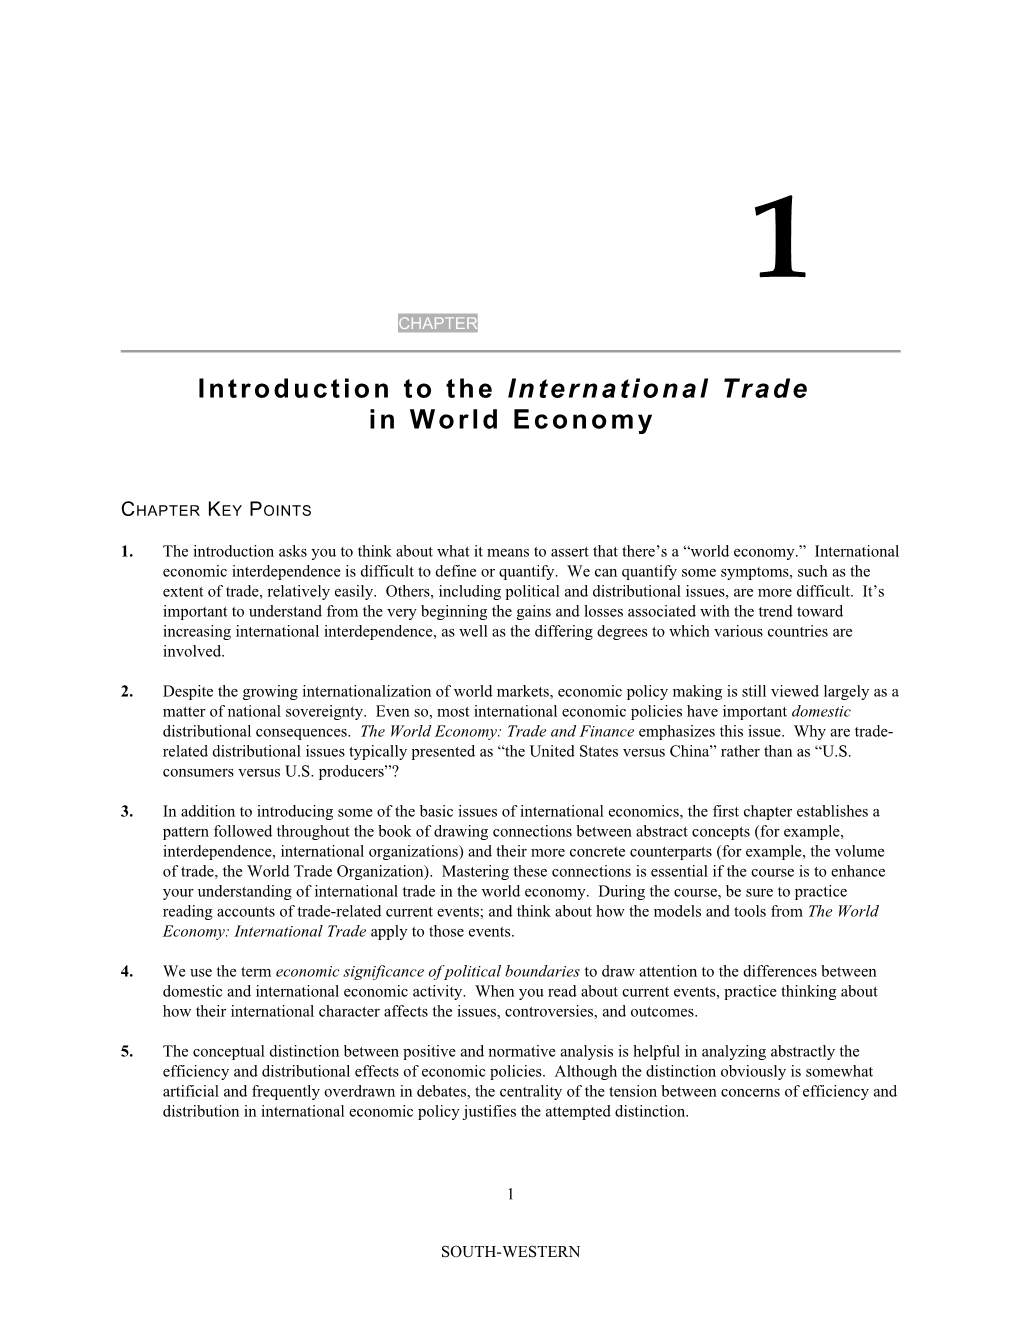 Introduction to the International Trade in World Economy